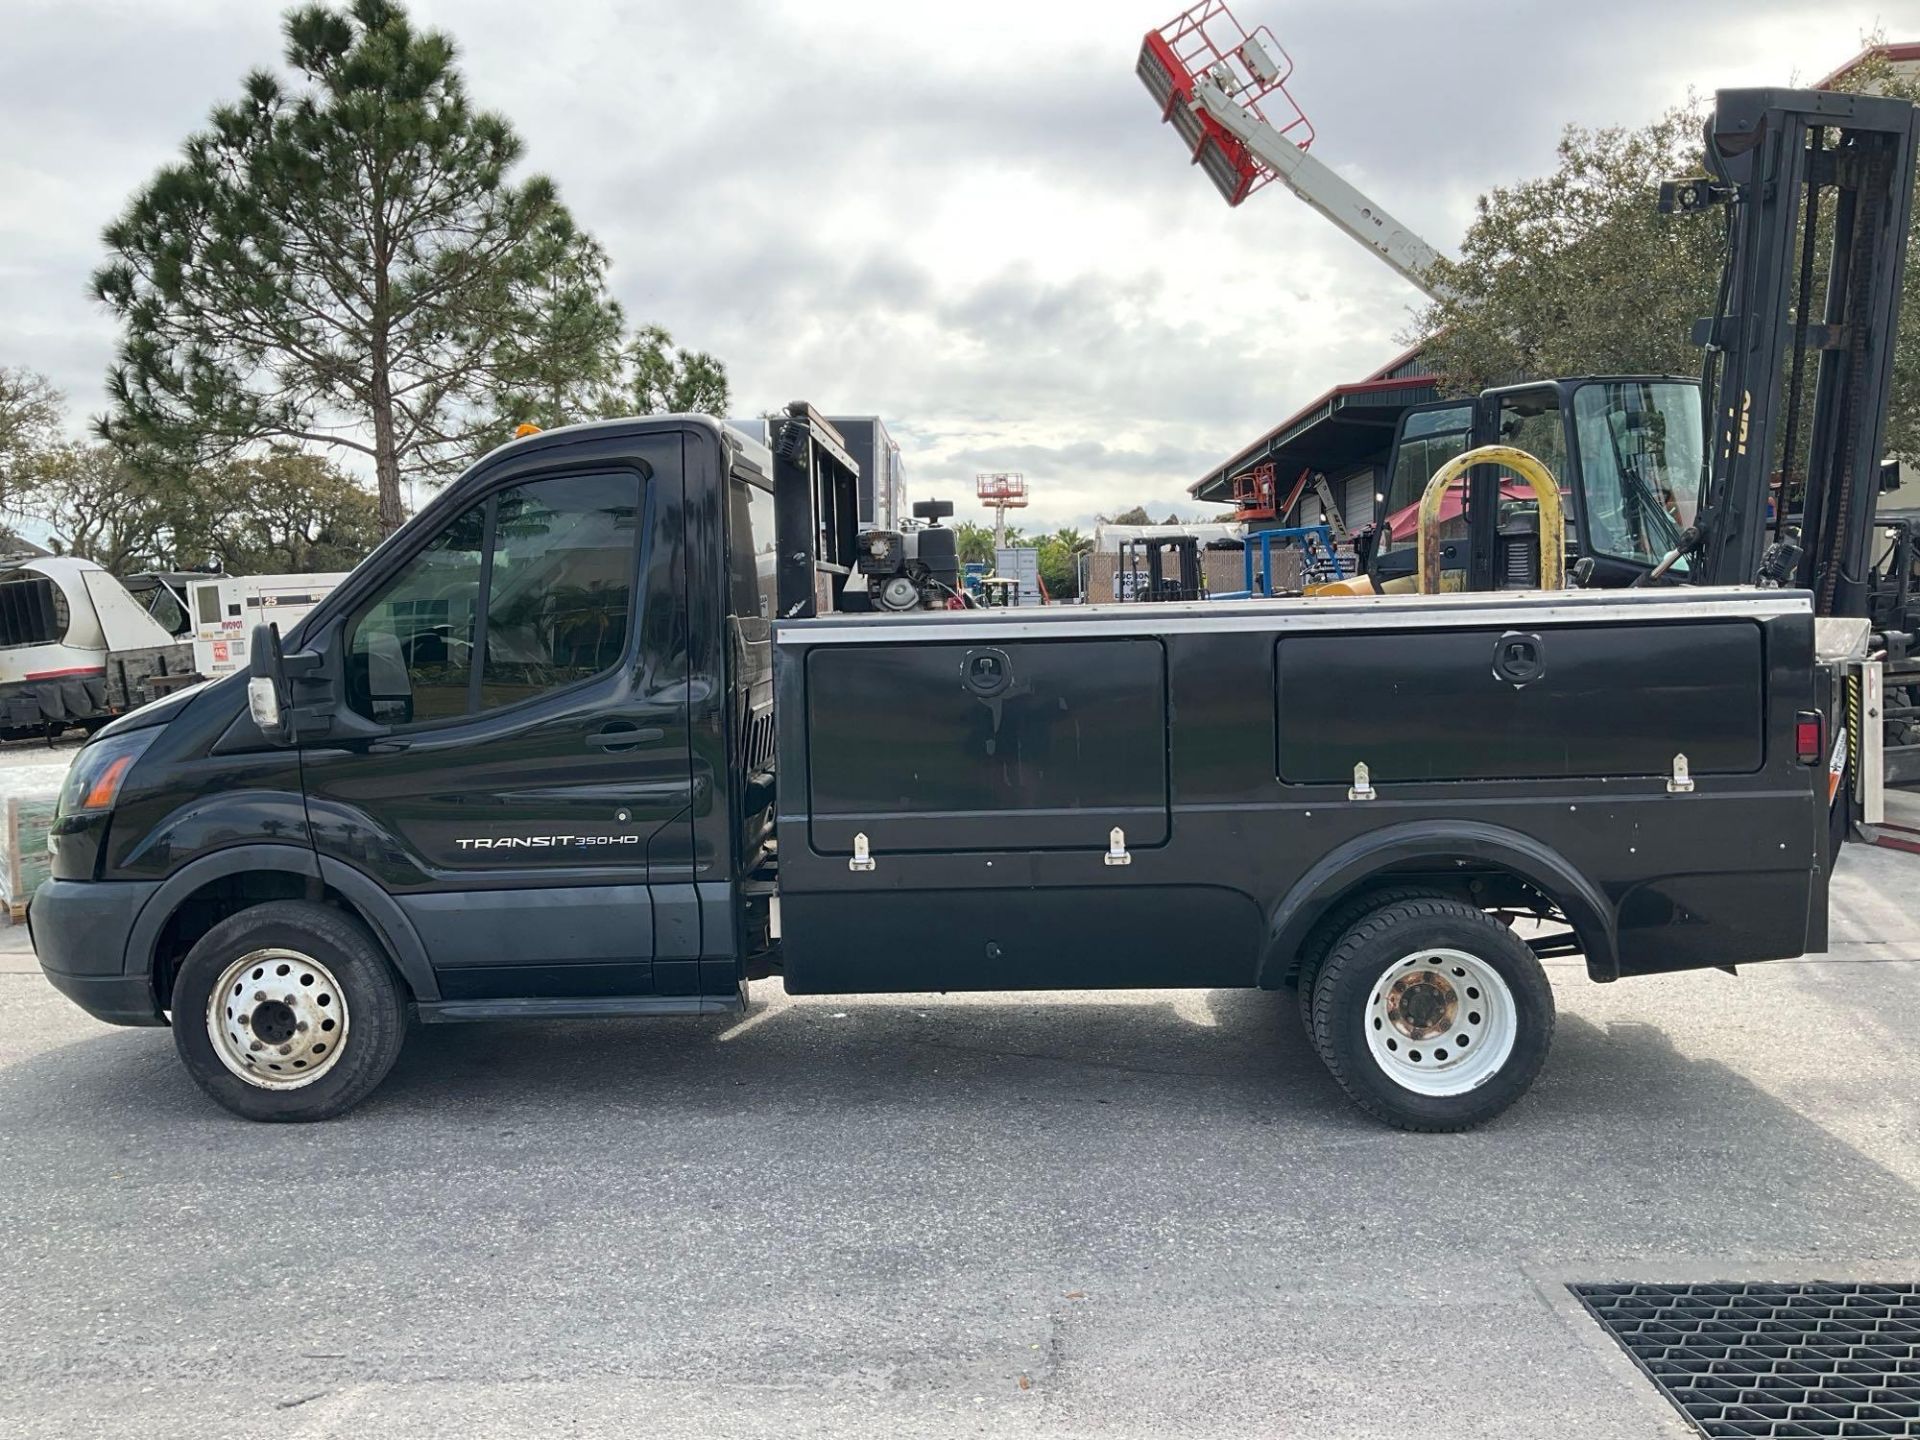 2017 FORD TRANSIT T-350 HD DRW UTILITY TRUCK , GAS POWERED AUTOMATIC, APPROX GVWR 9950LBS, STELLA... - Image 15 of 35